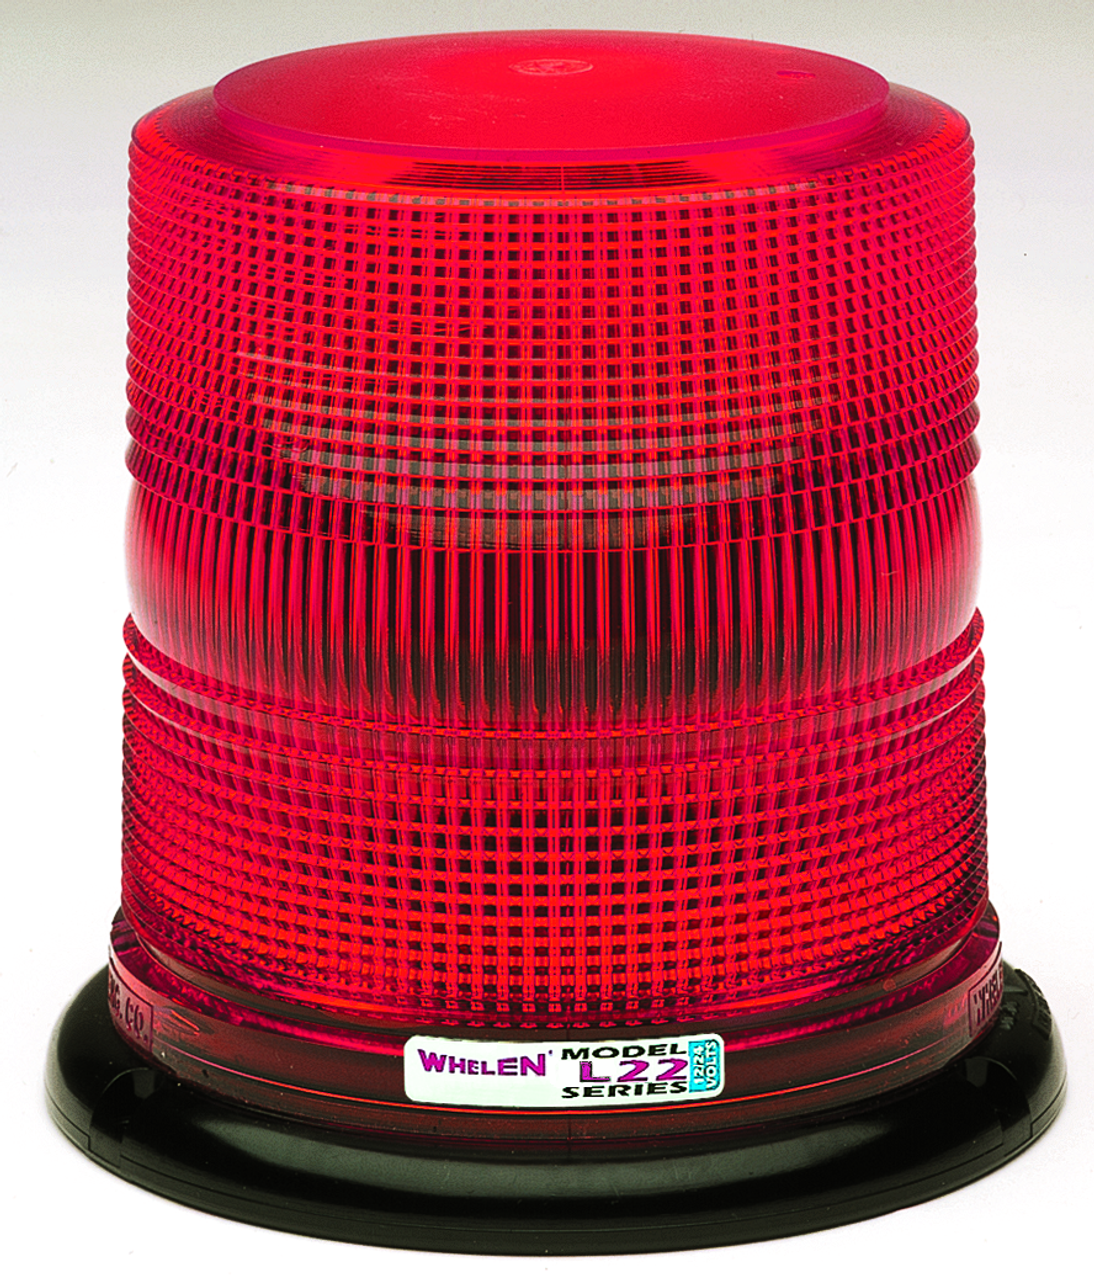 How Important is Your Little Red Beacon Light?